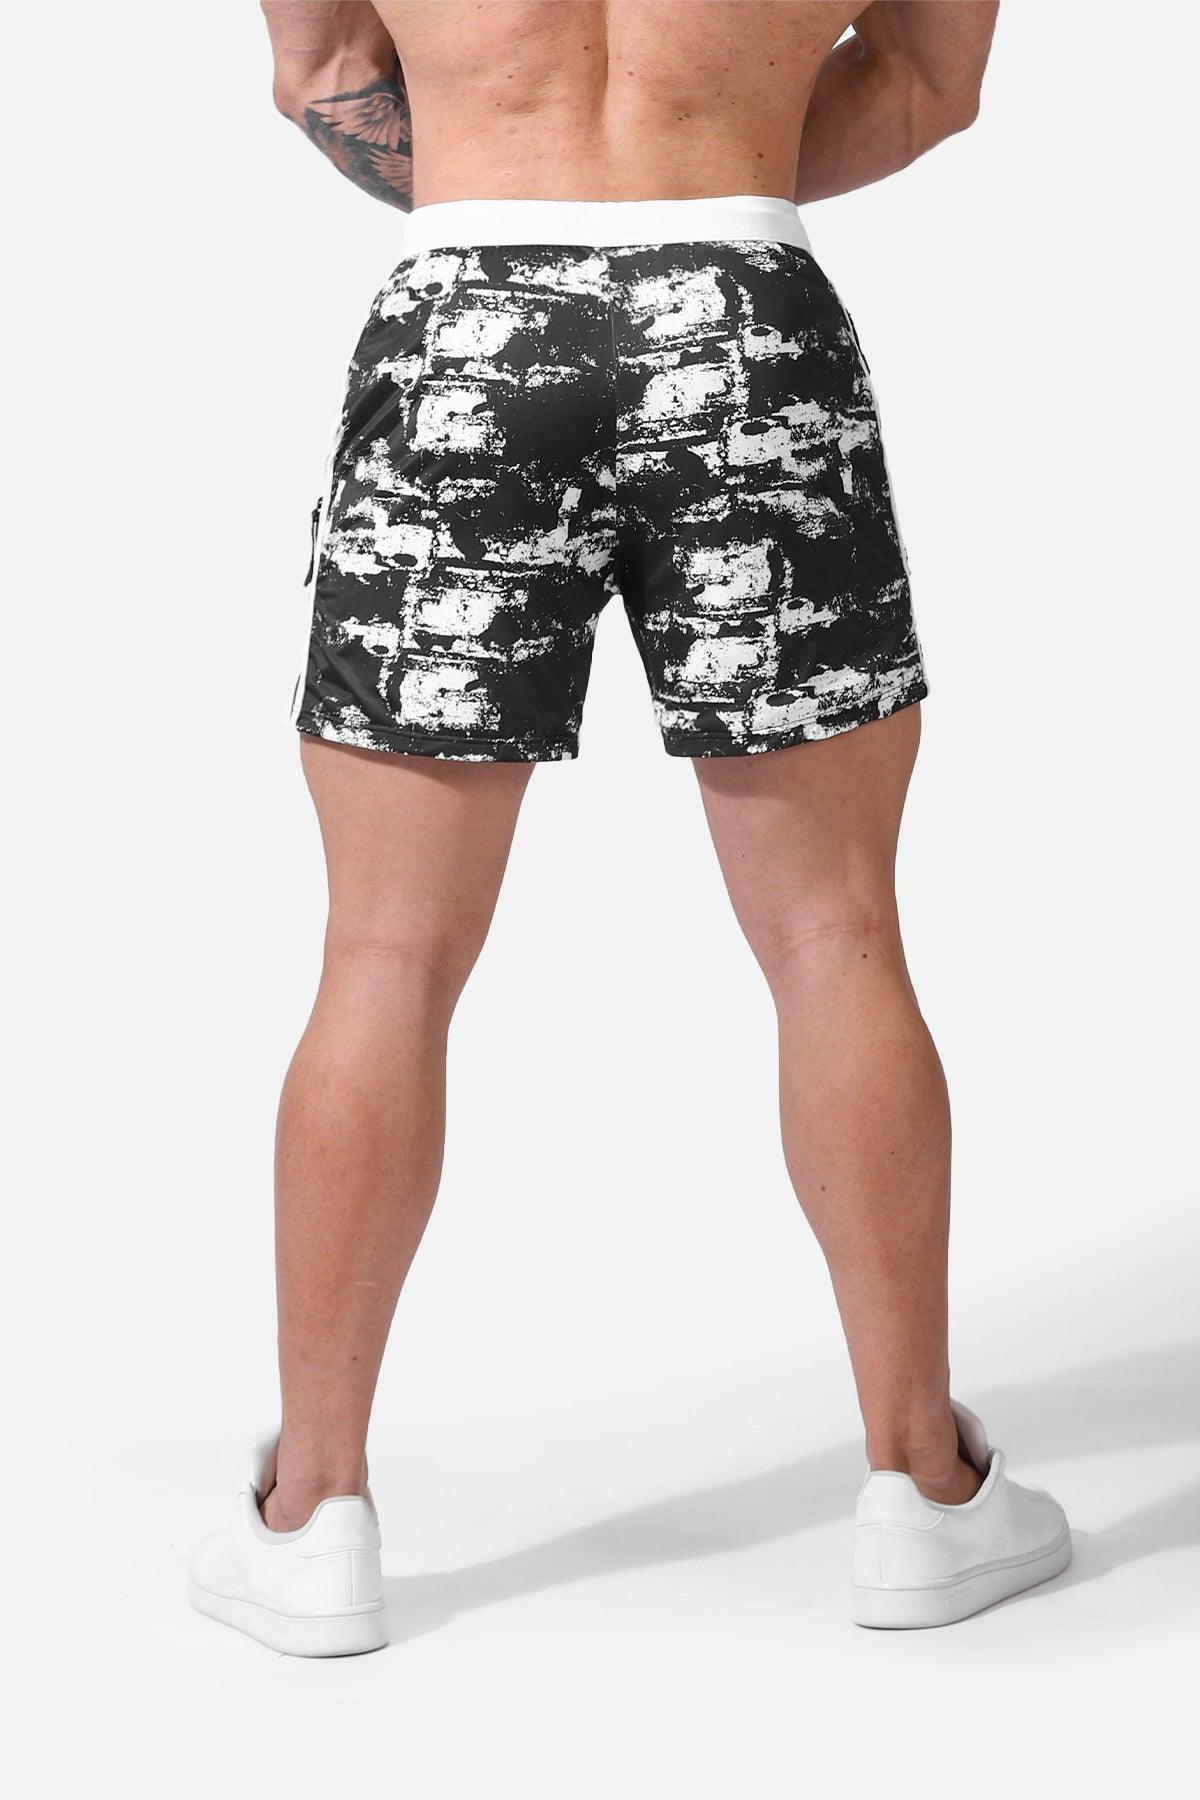 Ace Graphic Casual 5" Shorts 2.0 - Black Brush - Jed North